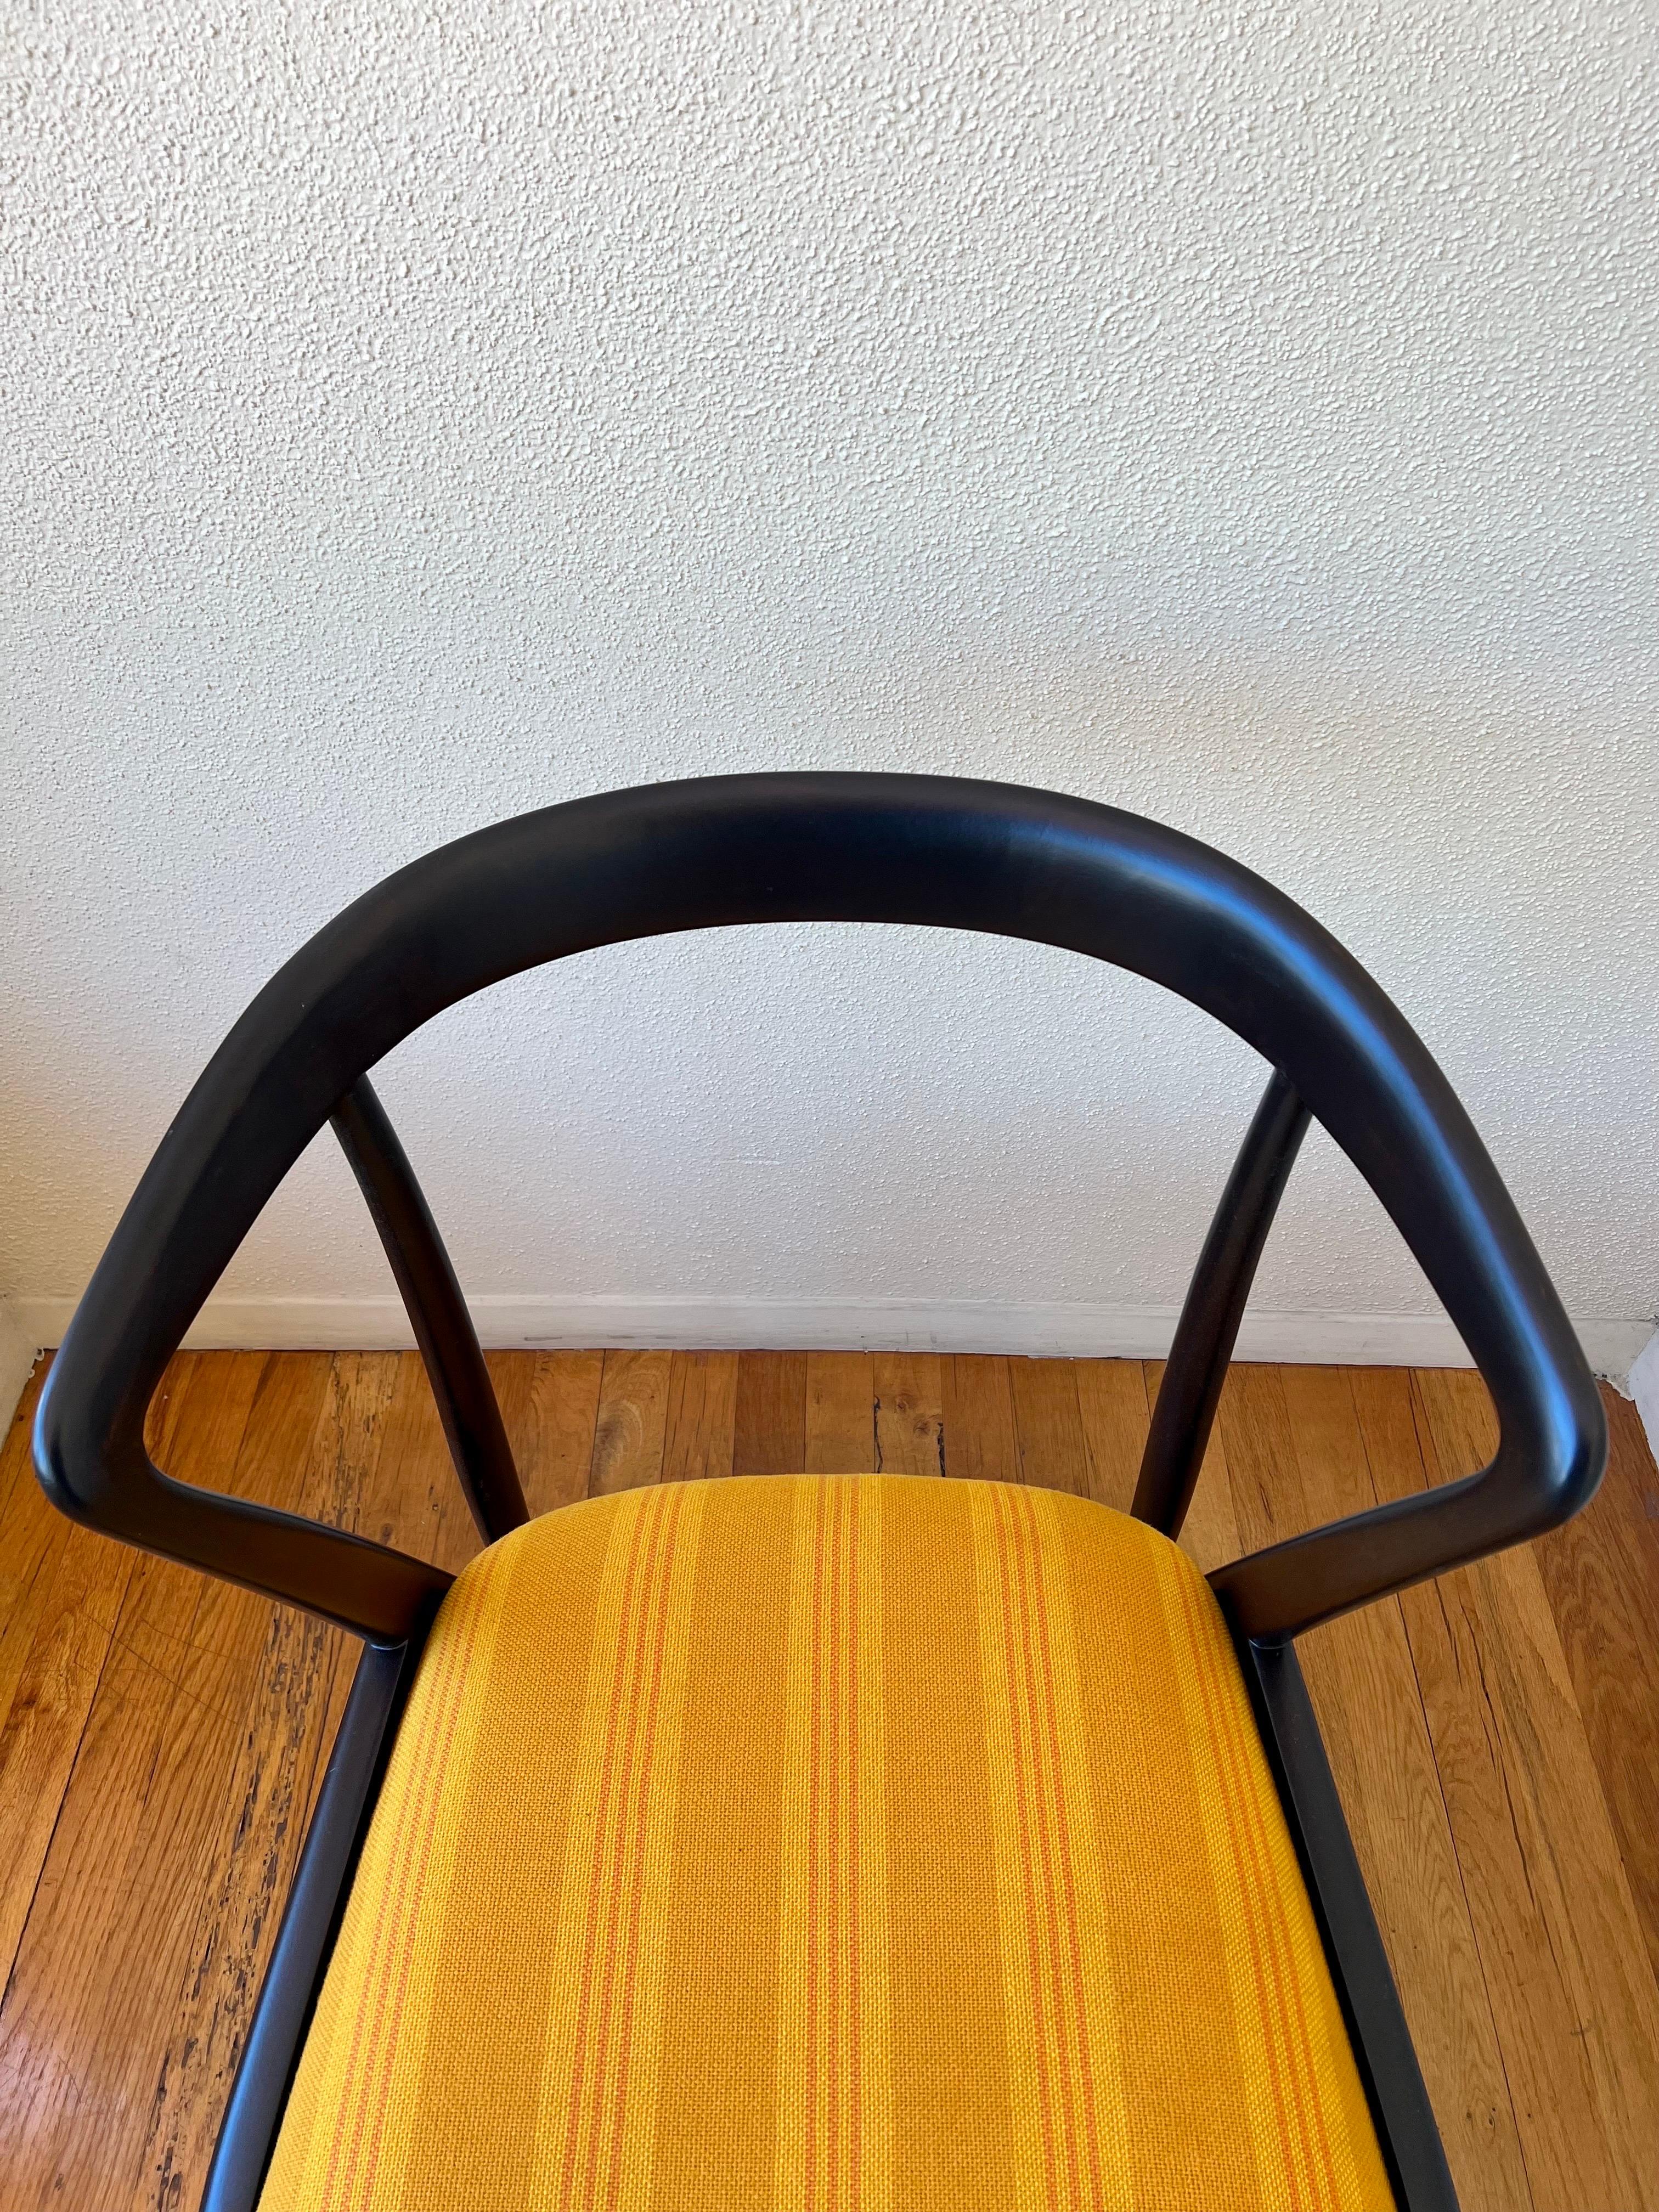 20th Century Mid-Century Modern Rare Chair by Bertha Schaefer for Singer & Sons Lacquer For Sale